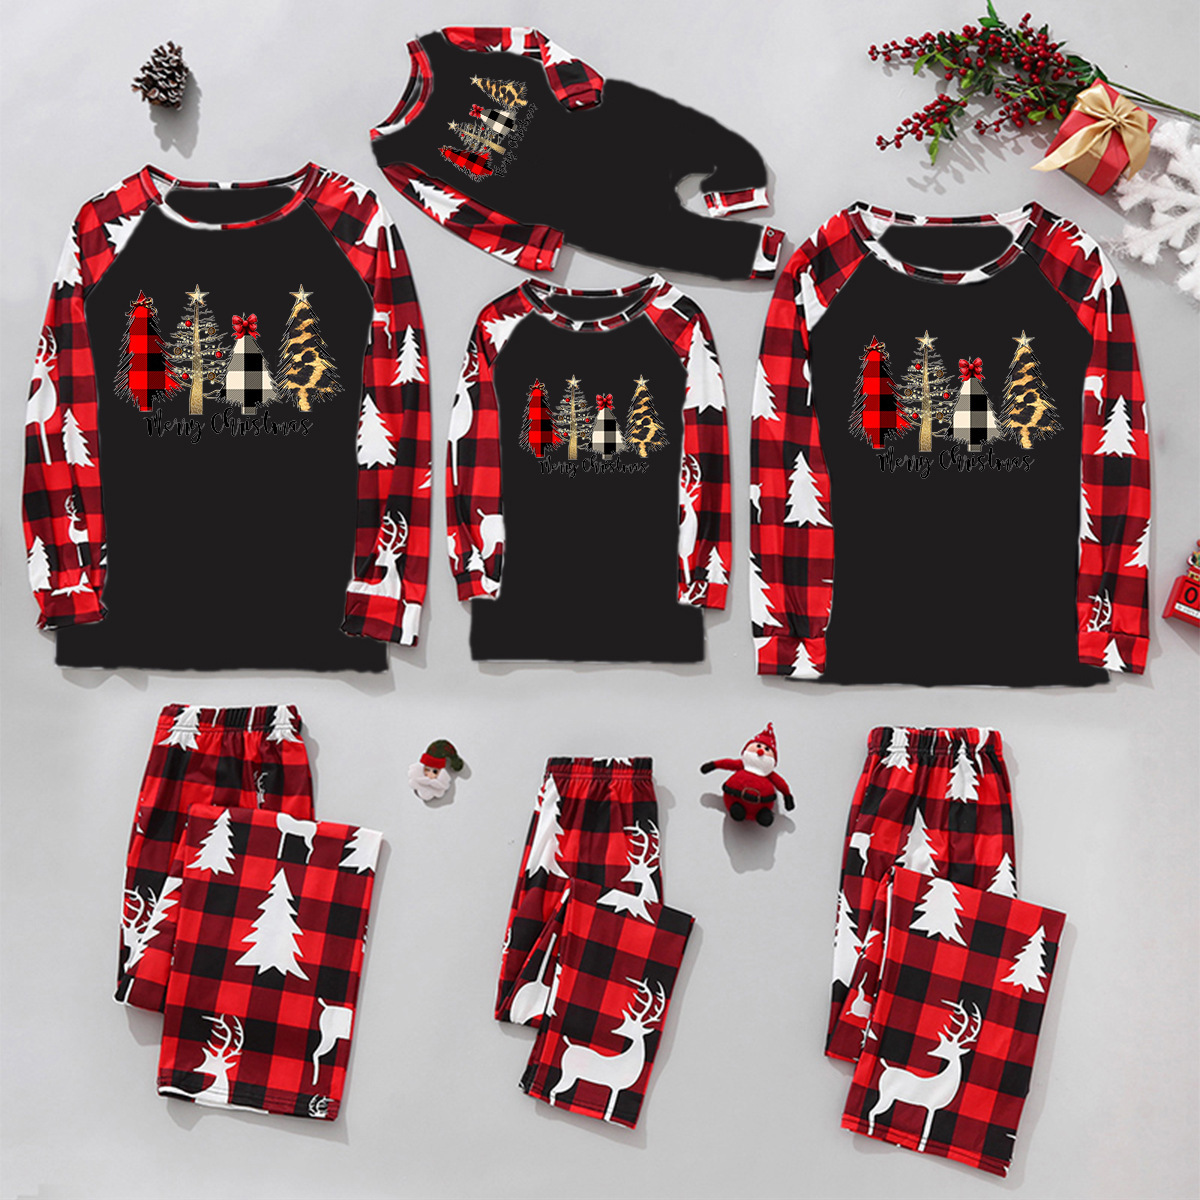 Four Christmas Tree Printed Family Wear Parent-child Homewear-Black Background